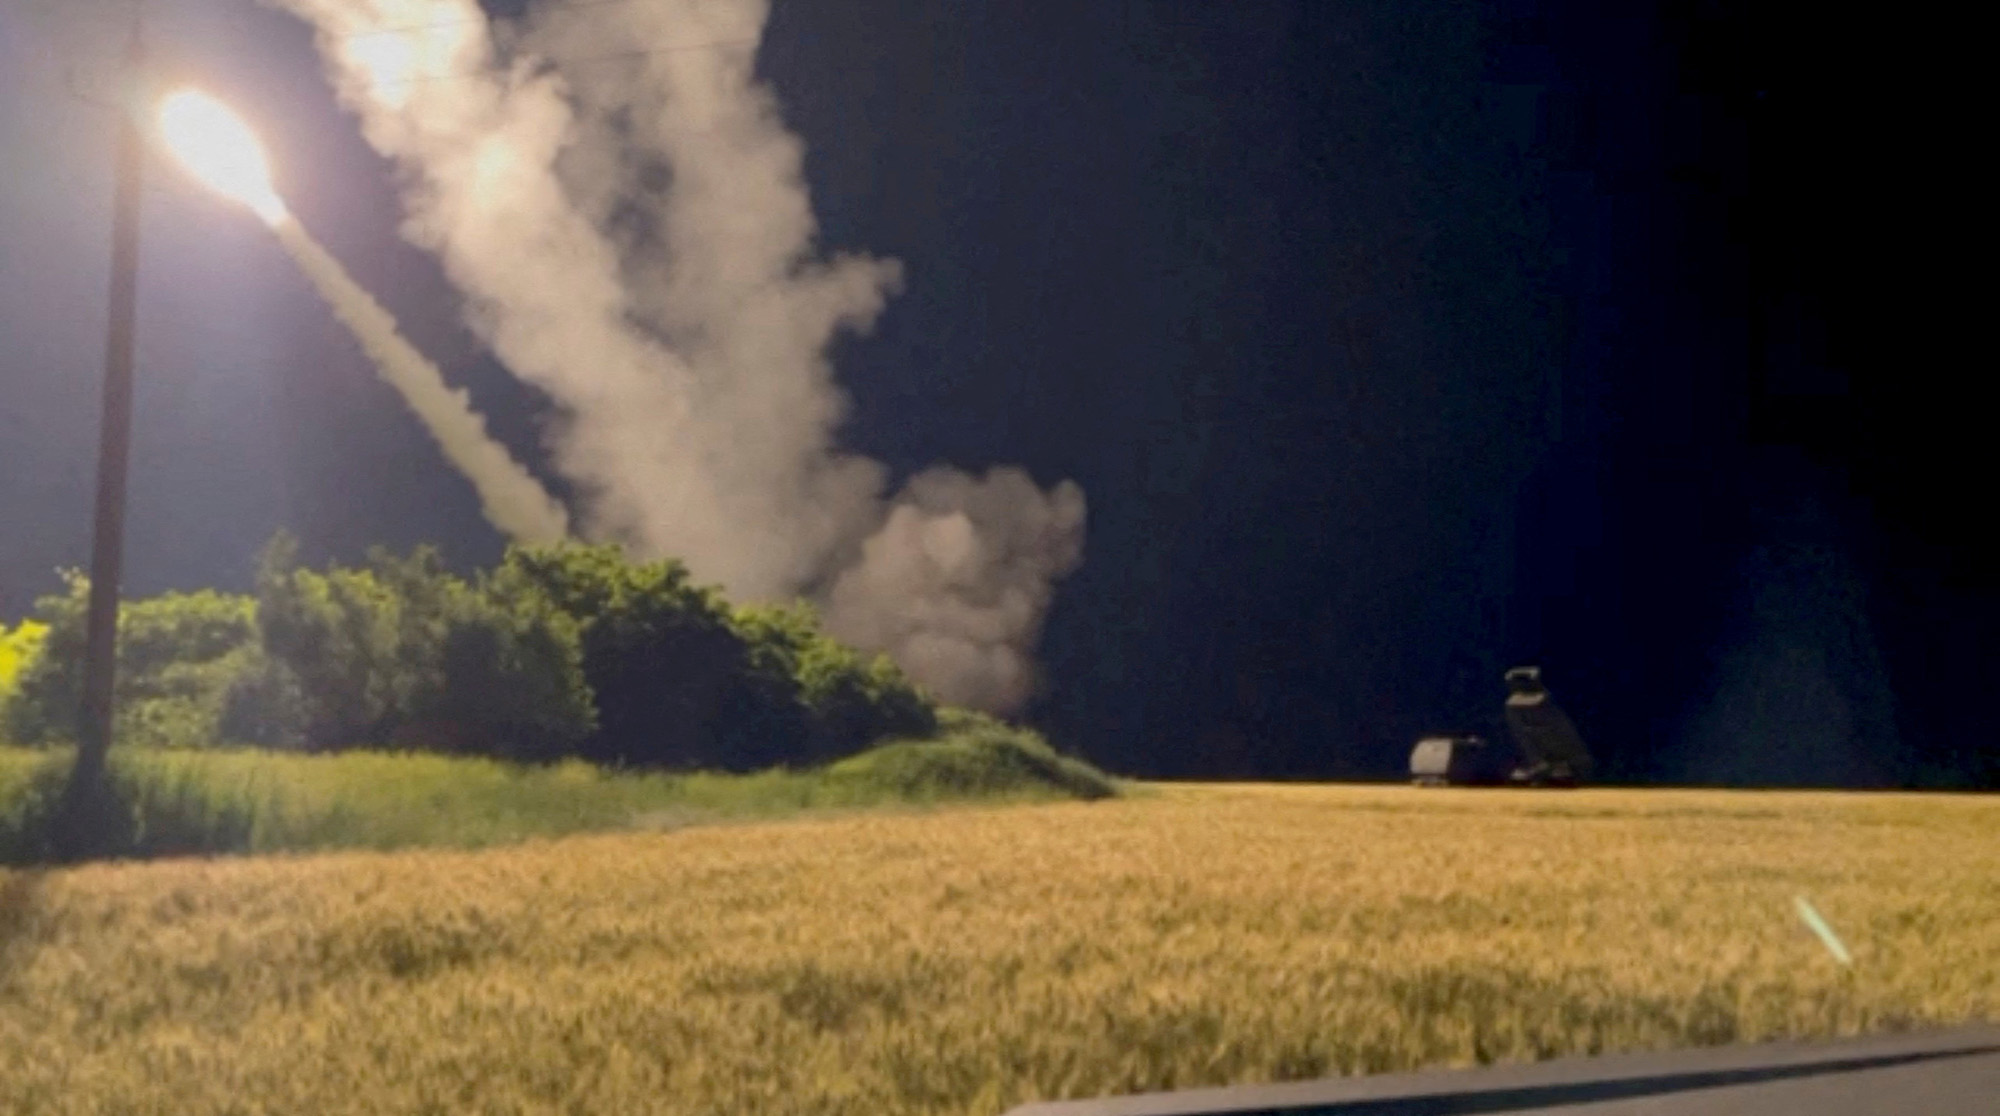 High Mobility Artillery Rocket System (HIMARS) is fired at an undisclosed location in Ukraine in this still image from June 24.